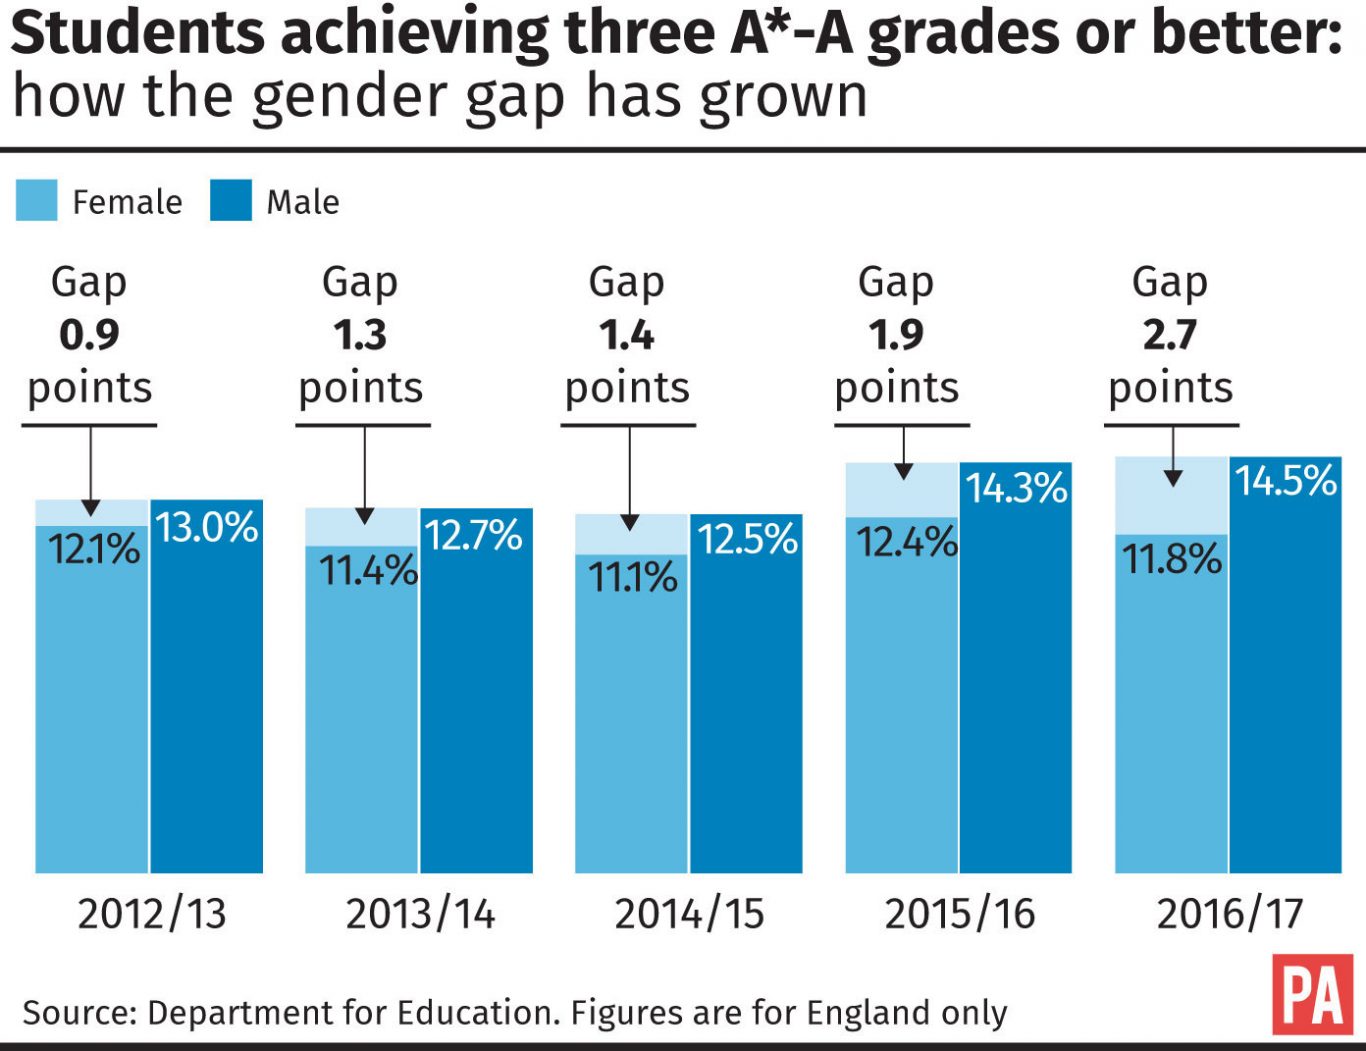 Students achieving three A*-A grades or better: how the gender gap has grown